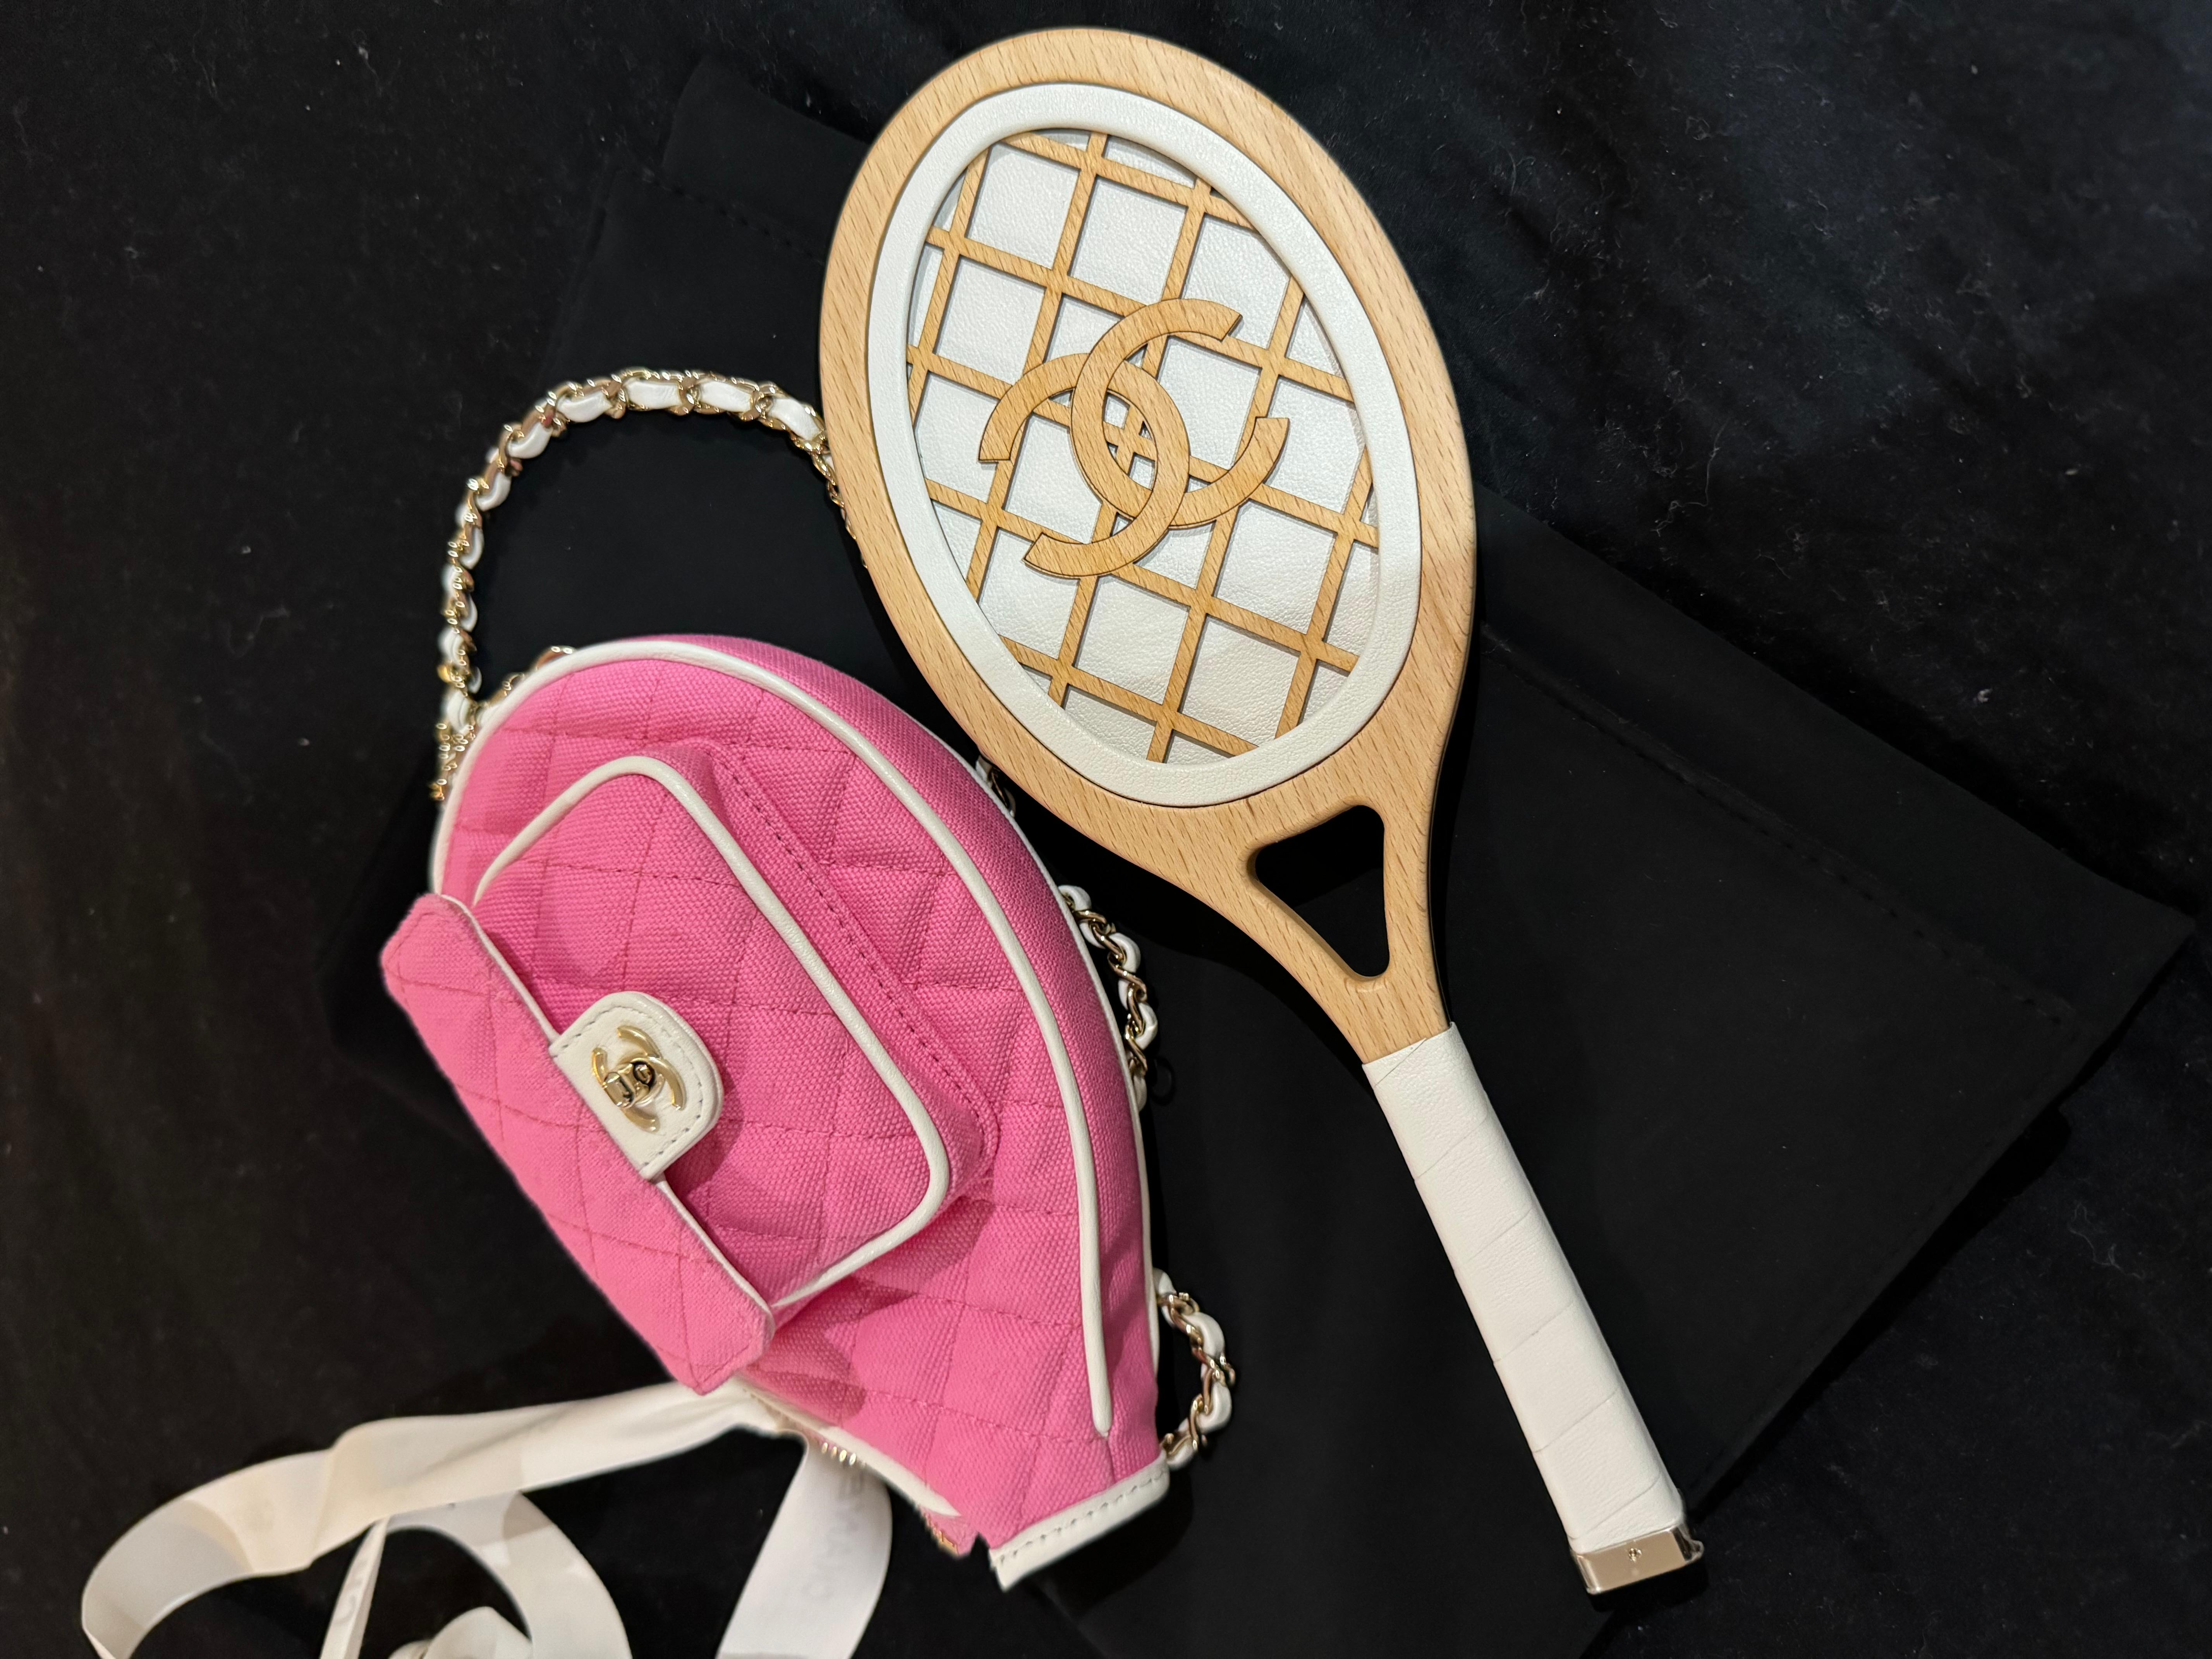 Chanel Tennis bag Barbie Pink and White  Racket Mirror Handbag Bag Runway In New Condition For Sale In London, England